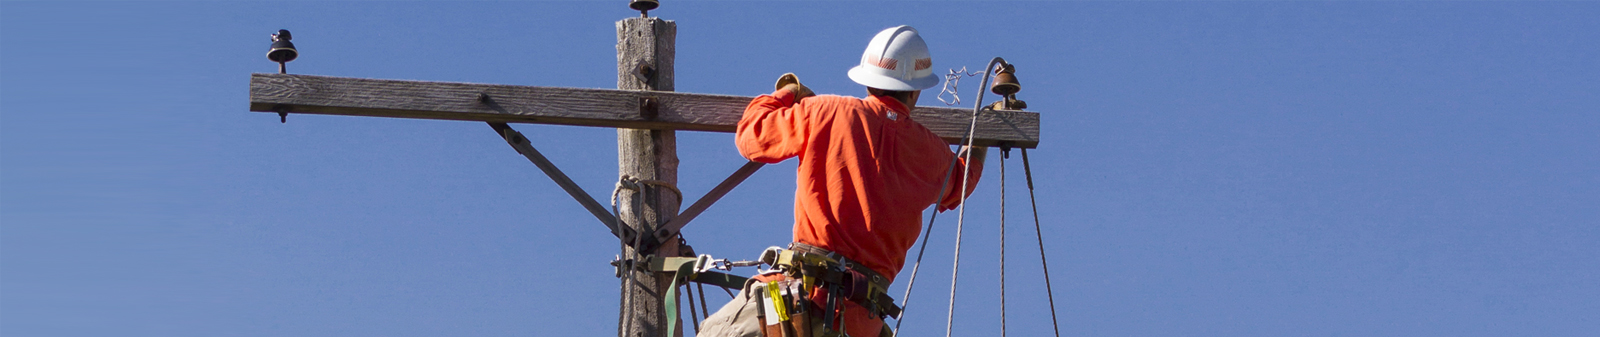 lineman at top of pole working on utility lines